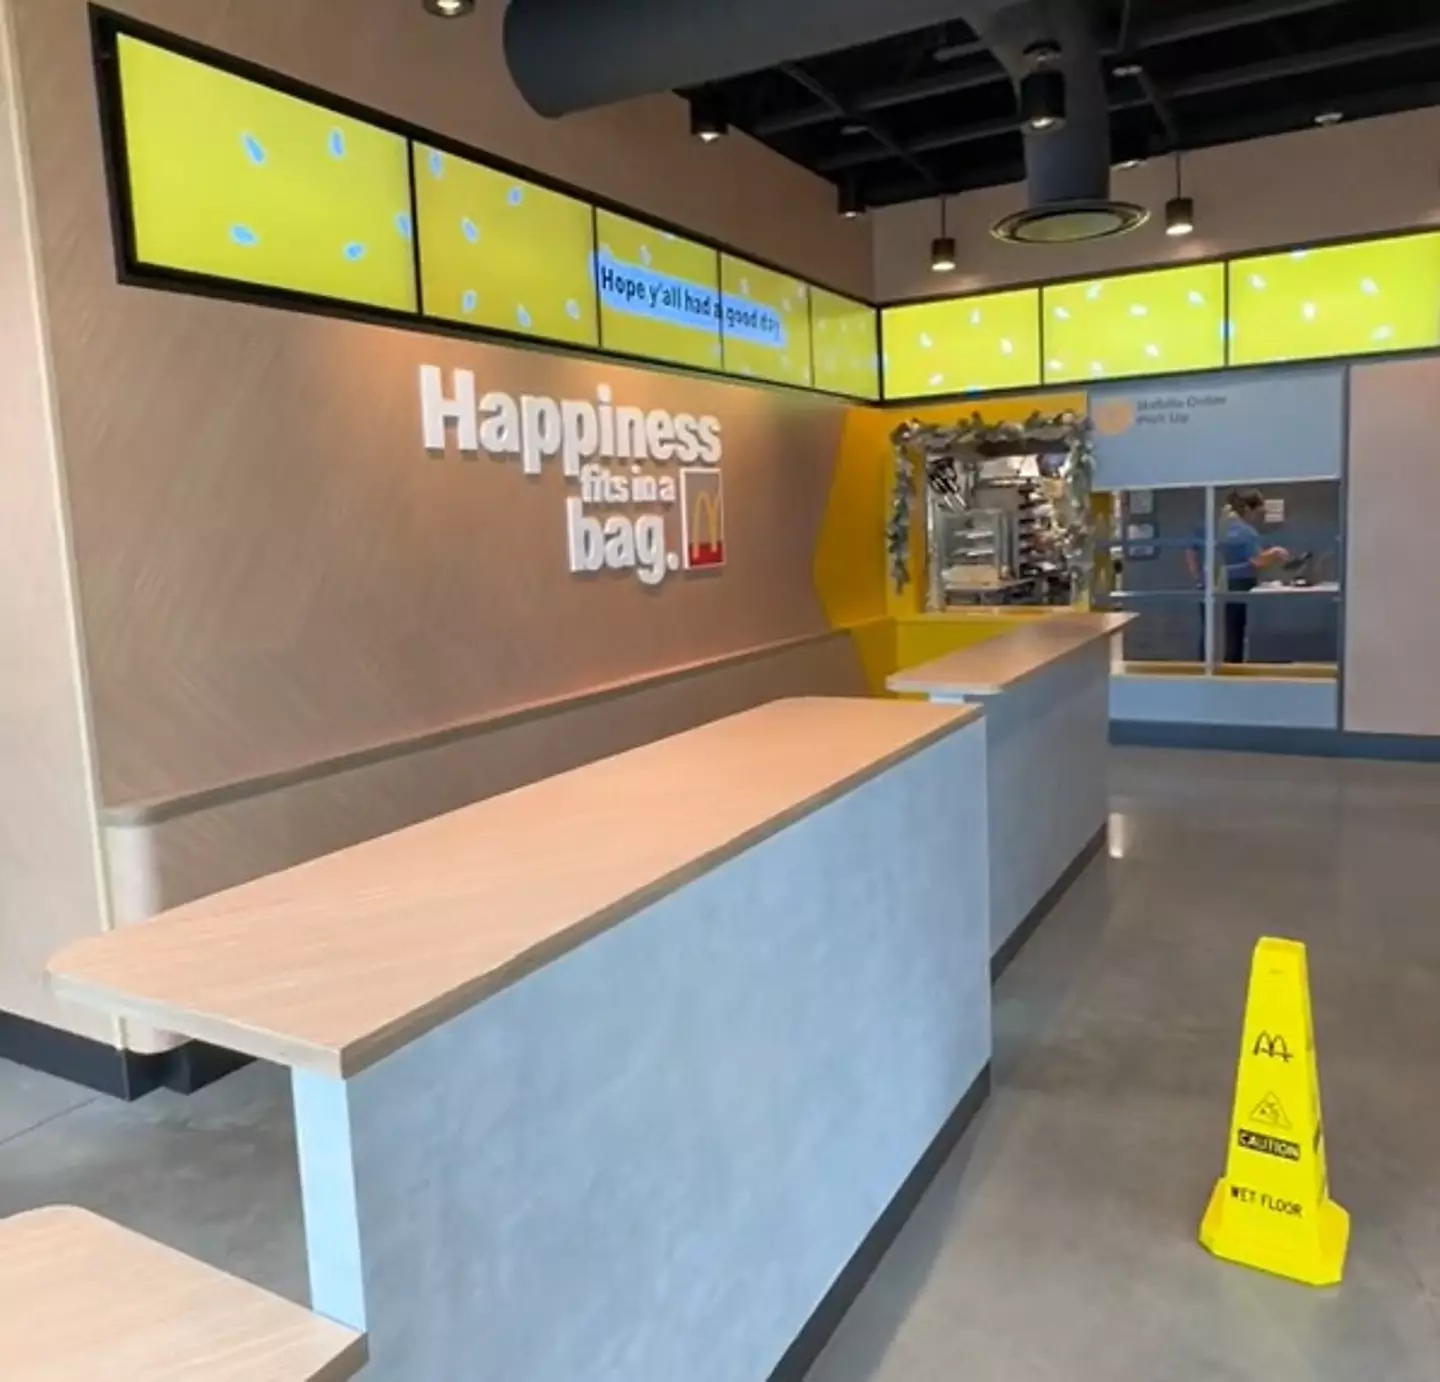 There's nowhere to sit down and nobody at the counter in this fully automated McDonald's.